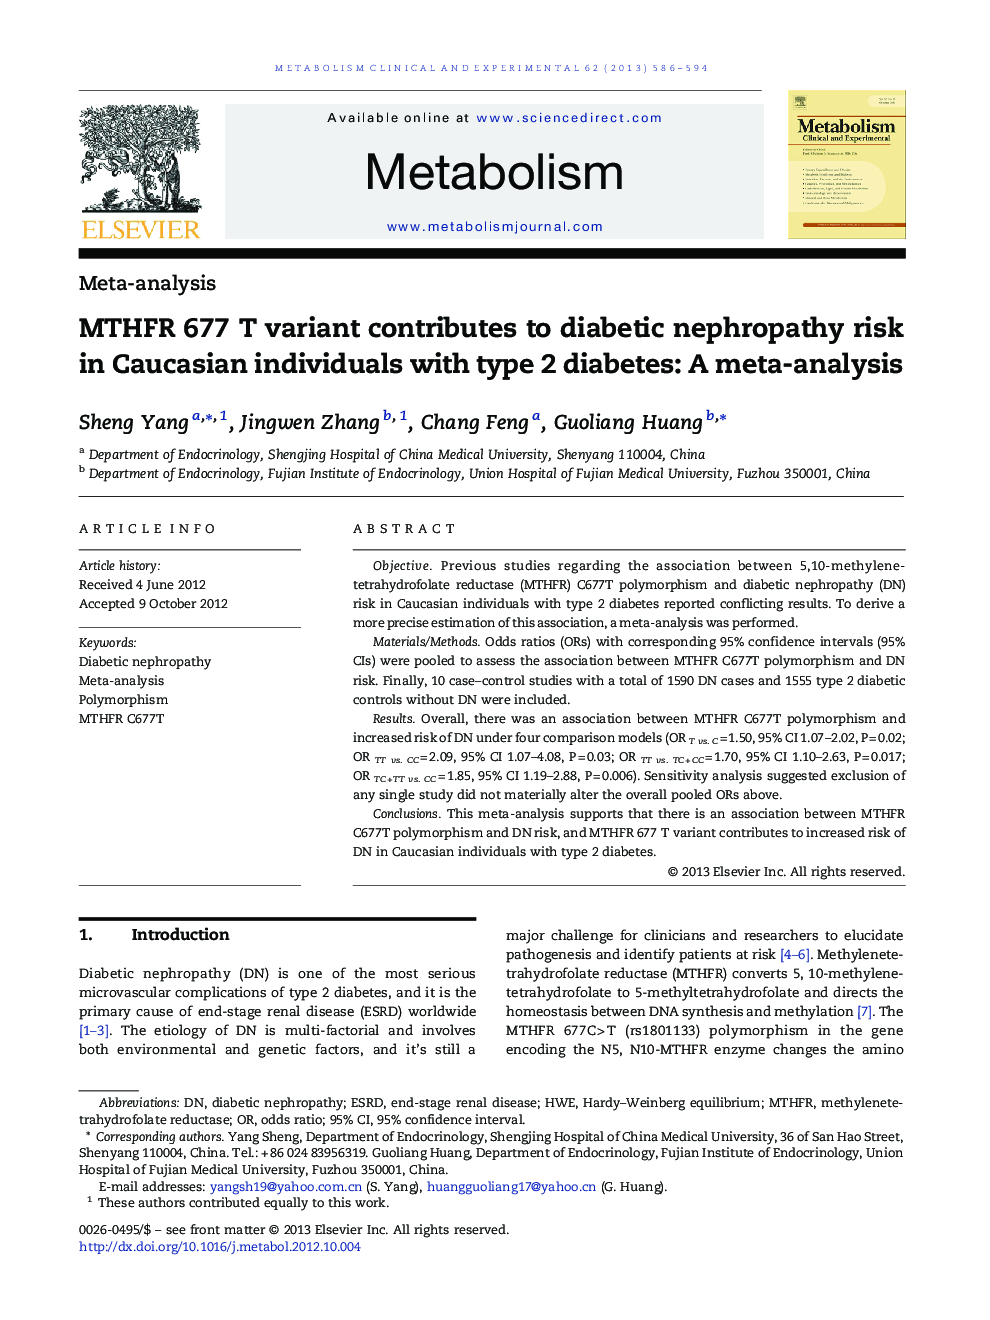 MTHFR 677 T variant contributes to diabetic nephropathy risk in Caucasian individuals with type 2 diabetes: A meta-analysis